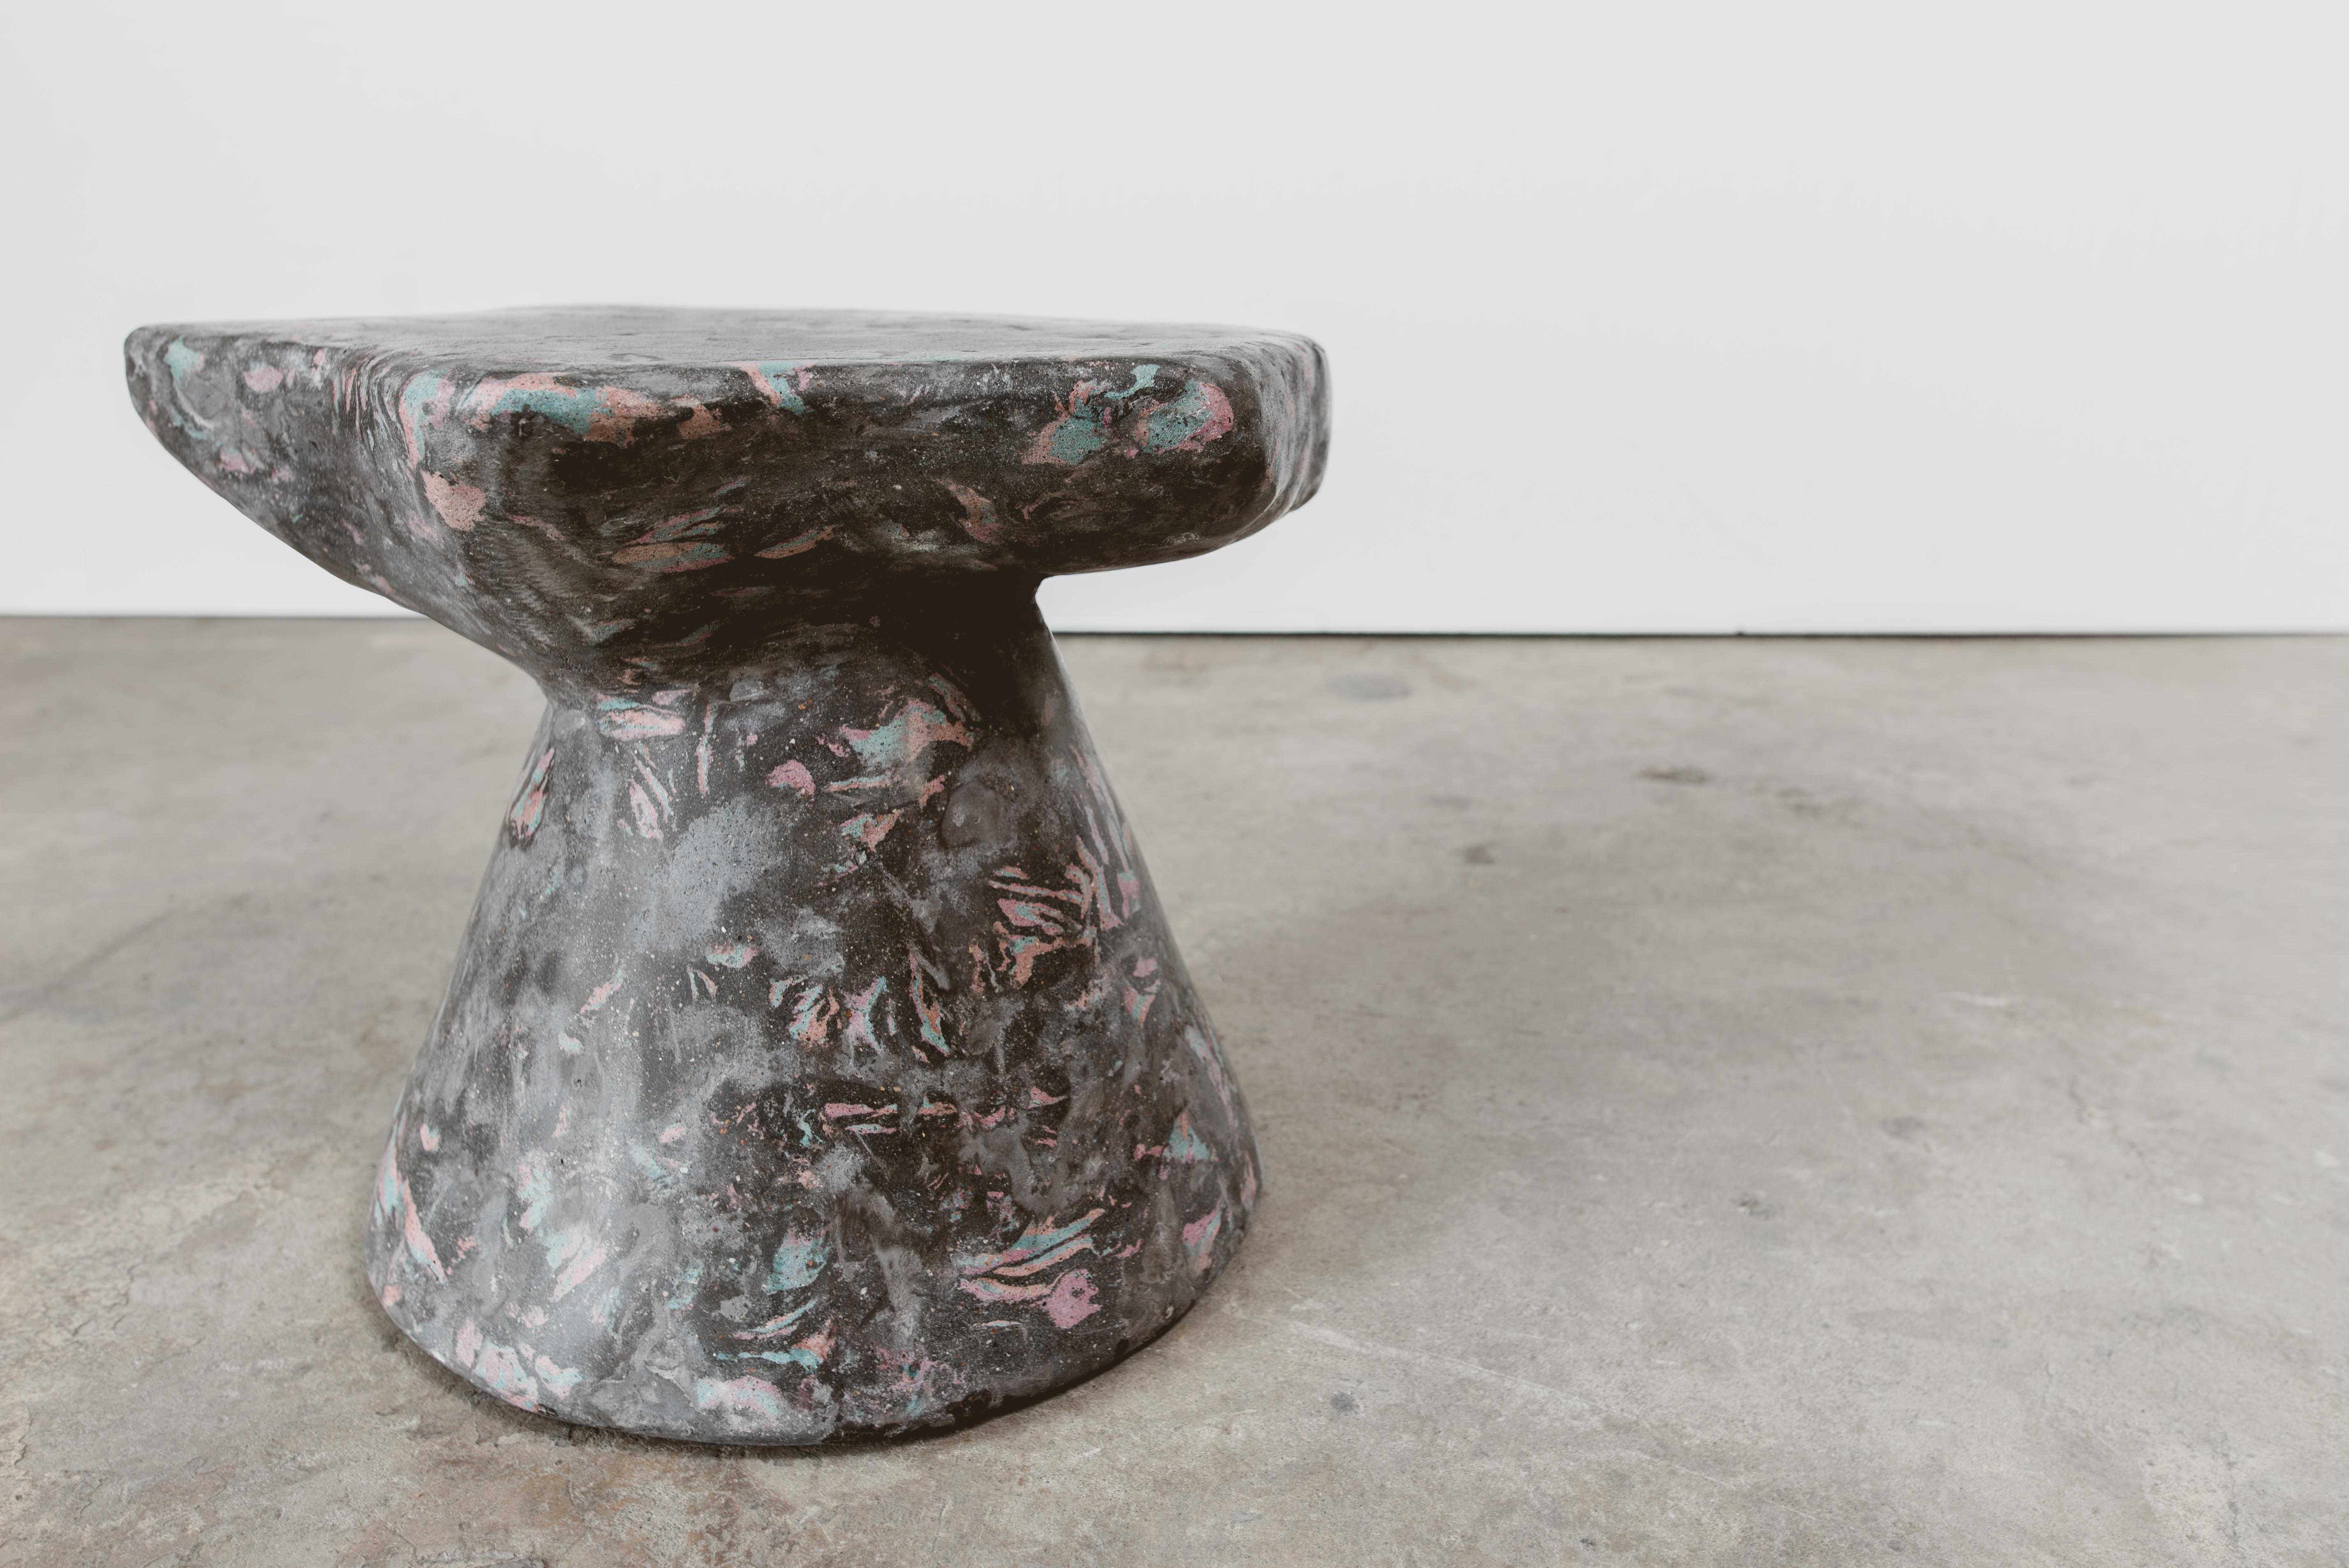 The child of an extruded hexagon and a cone. A mathematically derived form through the misuse of photogrammetry algorithms.
The fabrication of the table happens through a post-digital process of a digital and human making. The textures and patterns